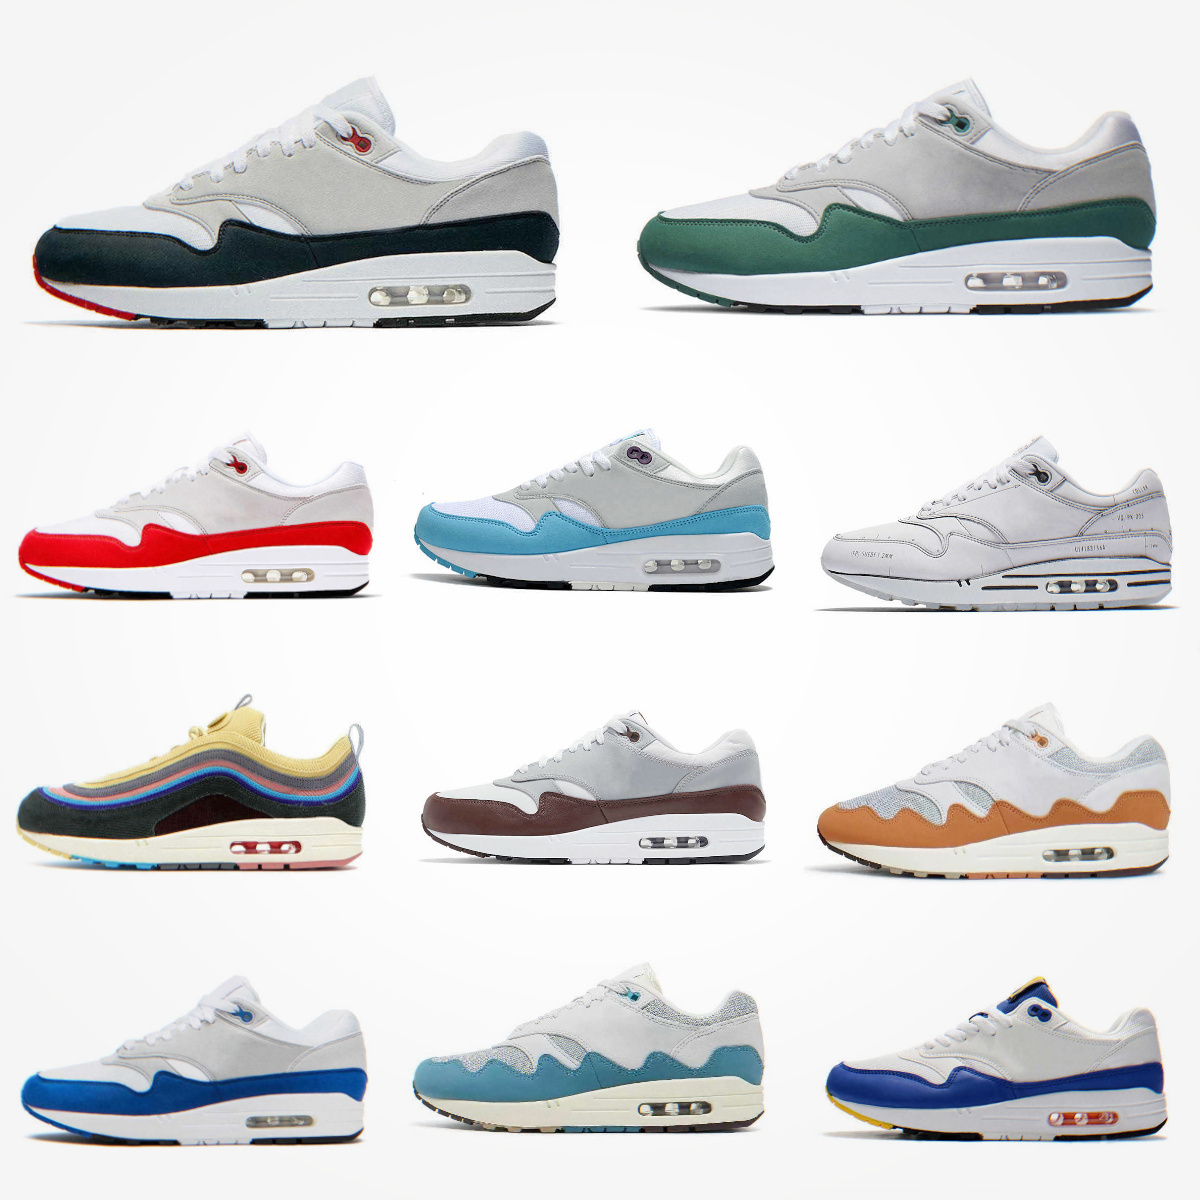 

Trainers 1 Men Women Running Shoes AirMaxs 1s Patta Aqua Maxs 87 Noise Black Grey Monarch Night Maroon Baroque Brown Airs Cave Stone Saturn Gold Mens Sports Sneakers S8, Please contact us